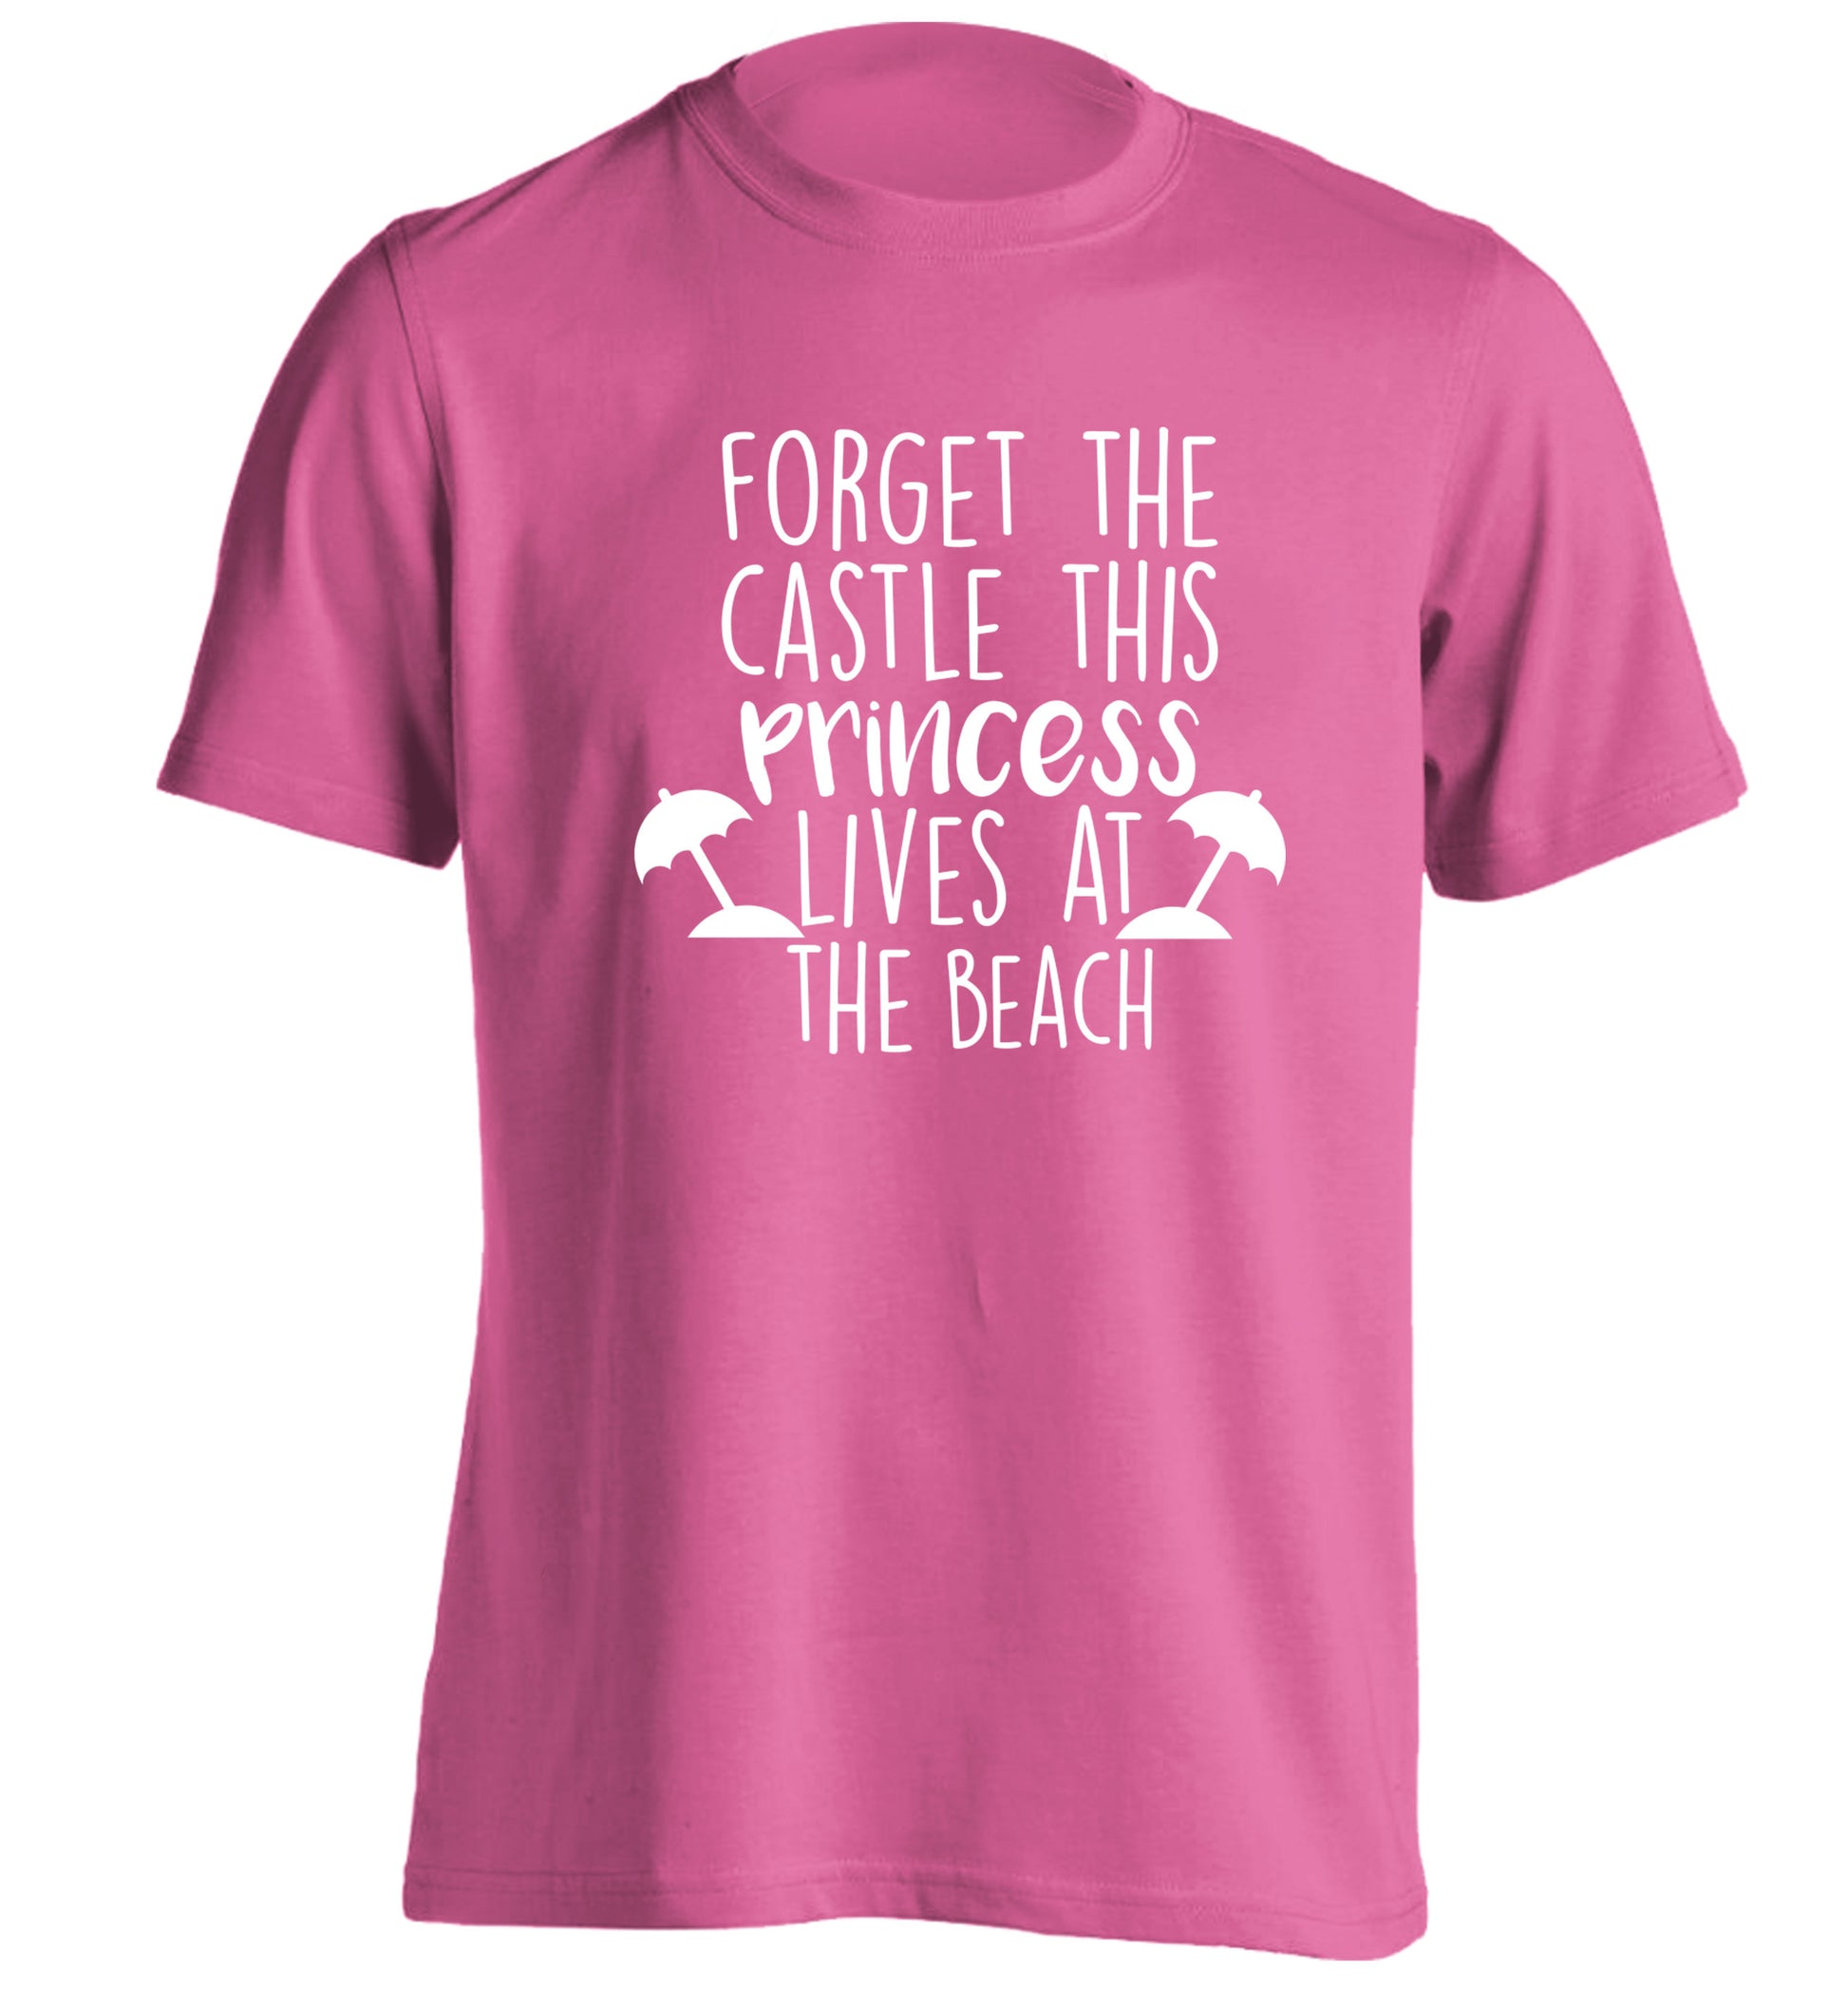 Forget the castle this princess lives at the beach adults unisex pink Tshirt 2XL